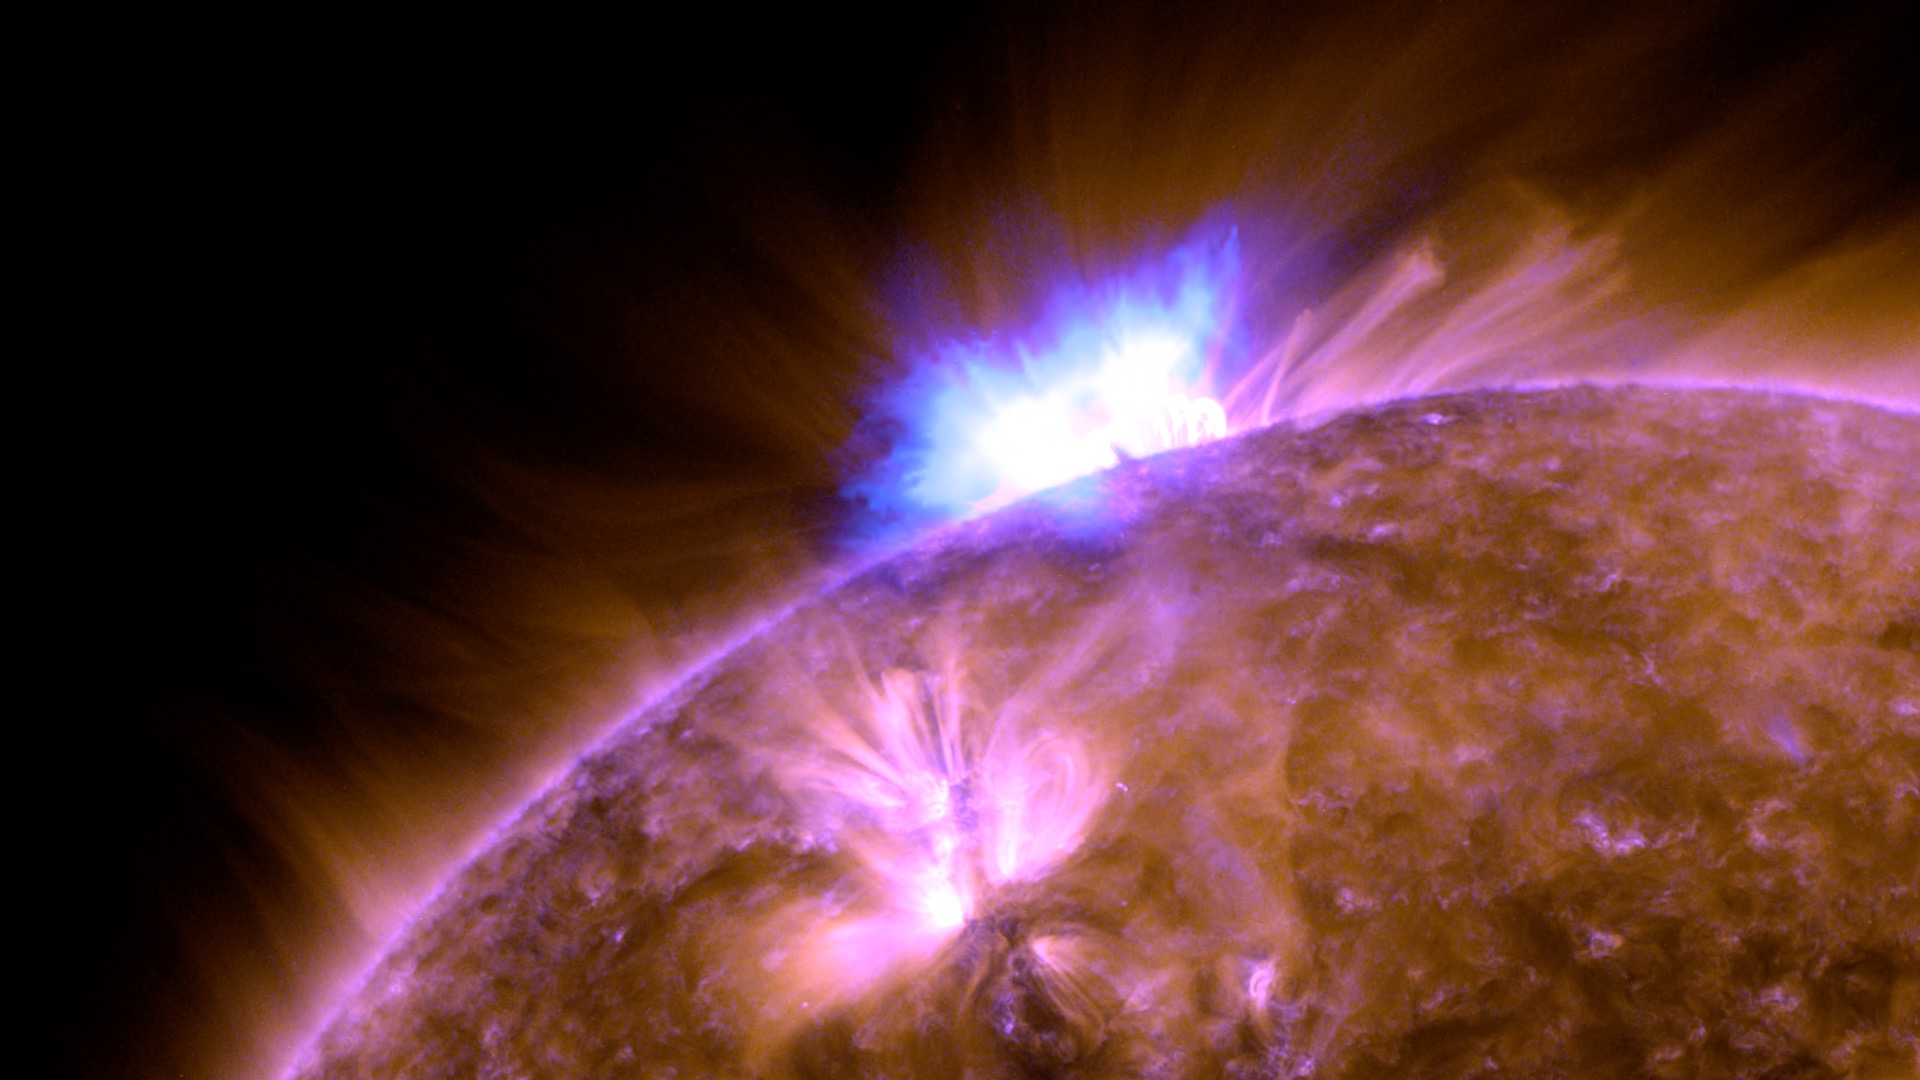 Short video showing the solar flare and subsequent prominence eruption and "arcade" of loops.Credit: NASA/GSFC/SDOMusic: "Beautiful Awesome" from Universal Production MusicWatch this video on the NASA Goddard YouTube channel.Complete transcript available.